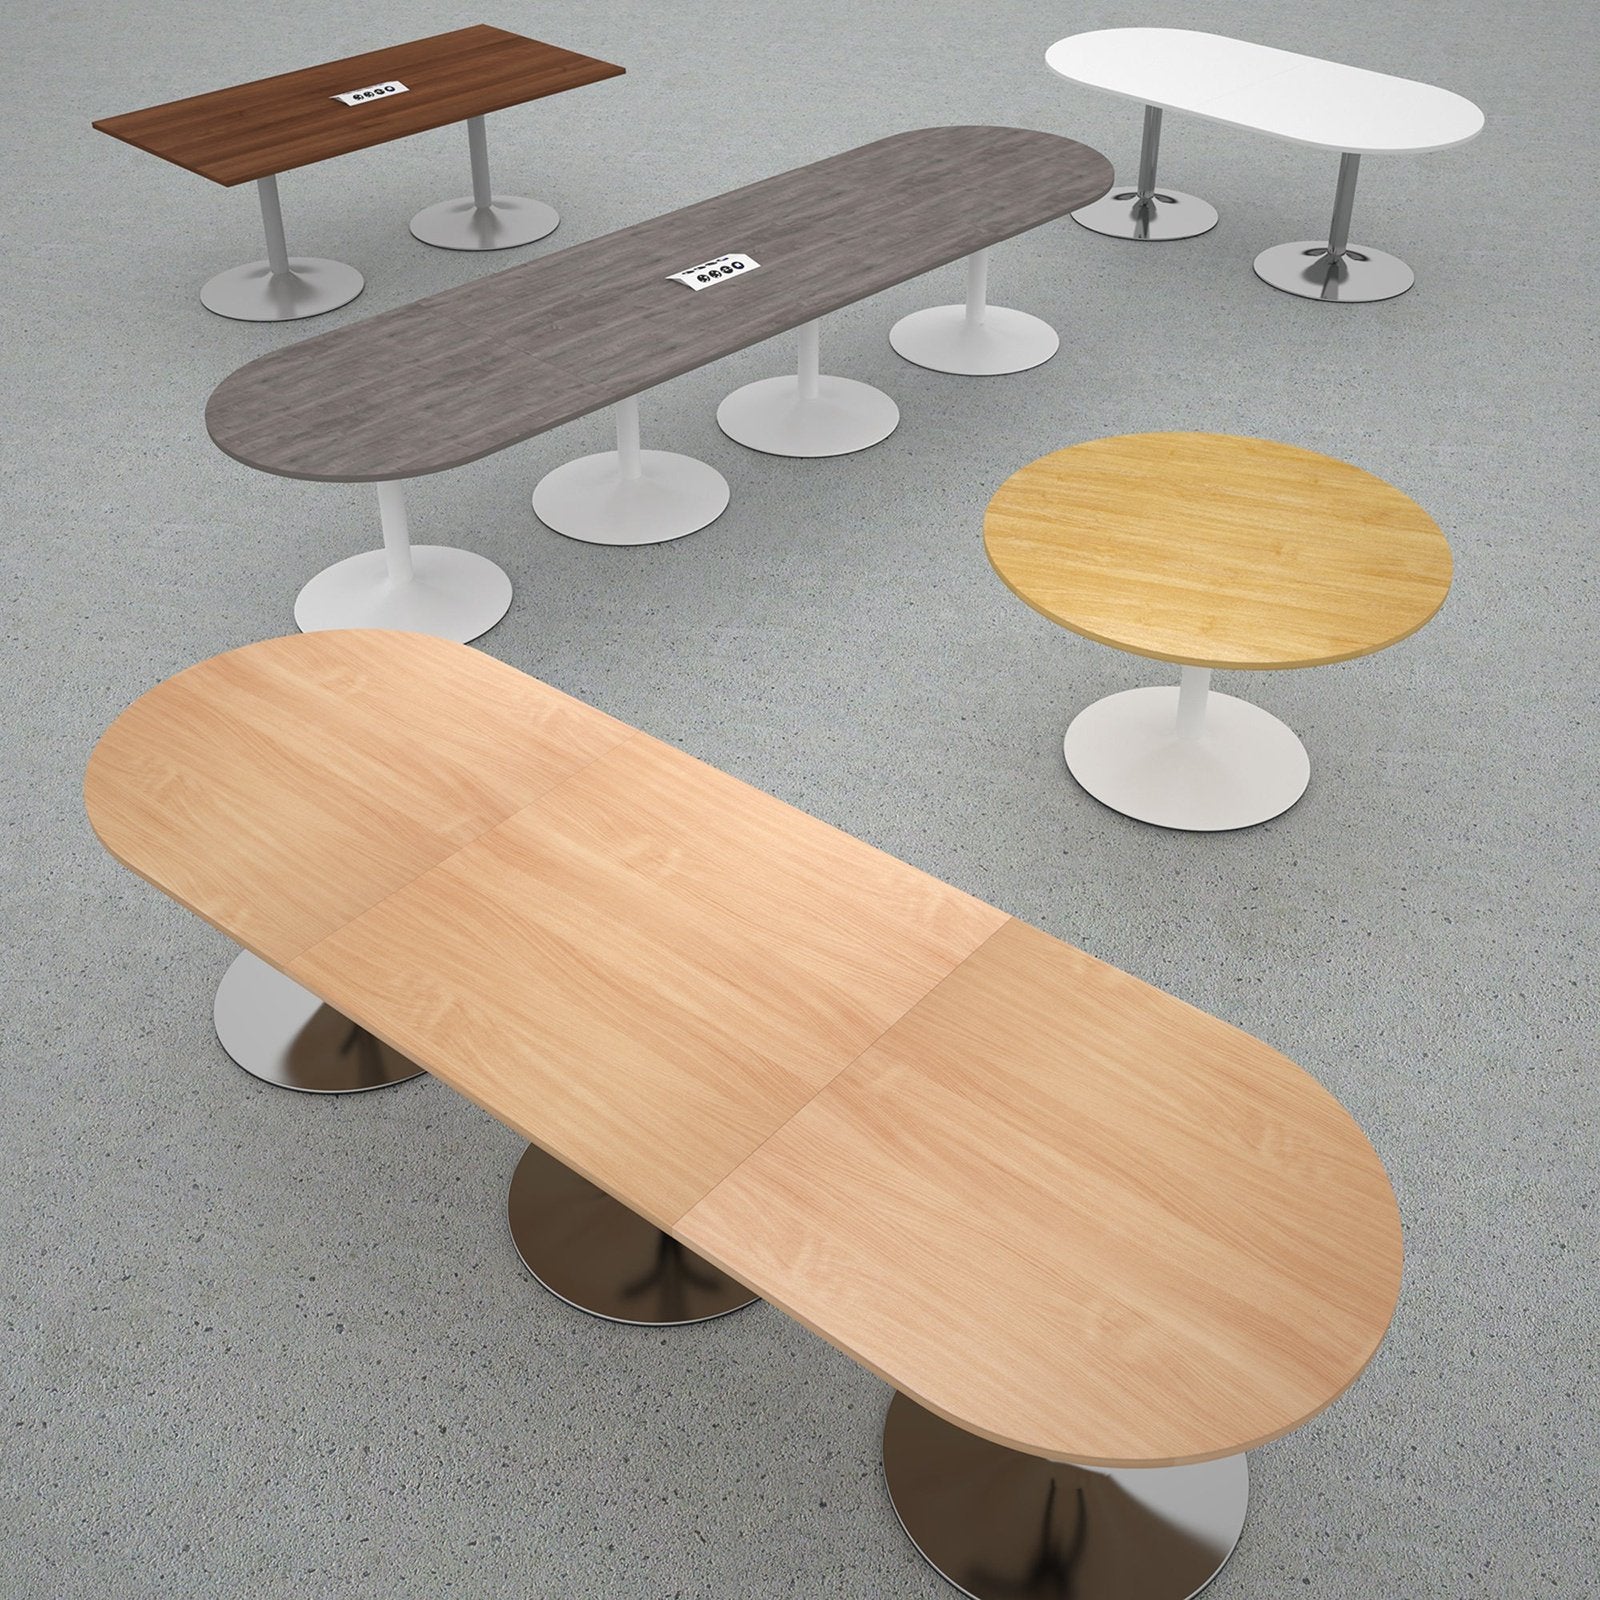 Trumpet base radial end boardroom table with central cutout - Office Products Online